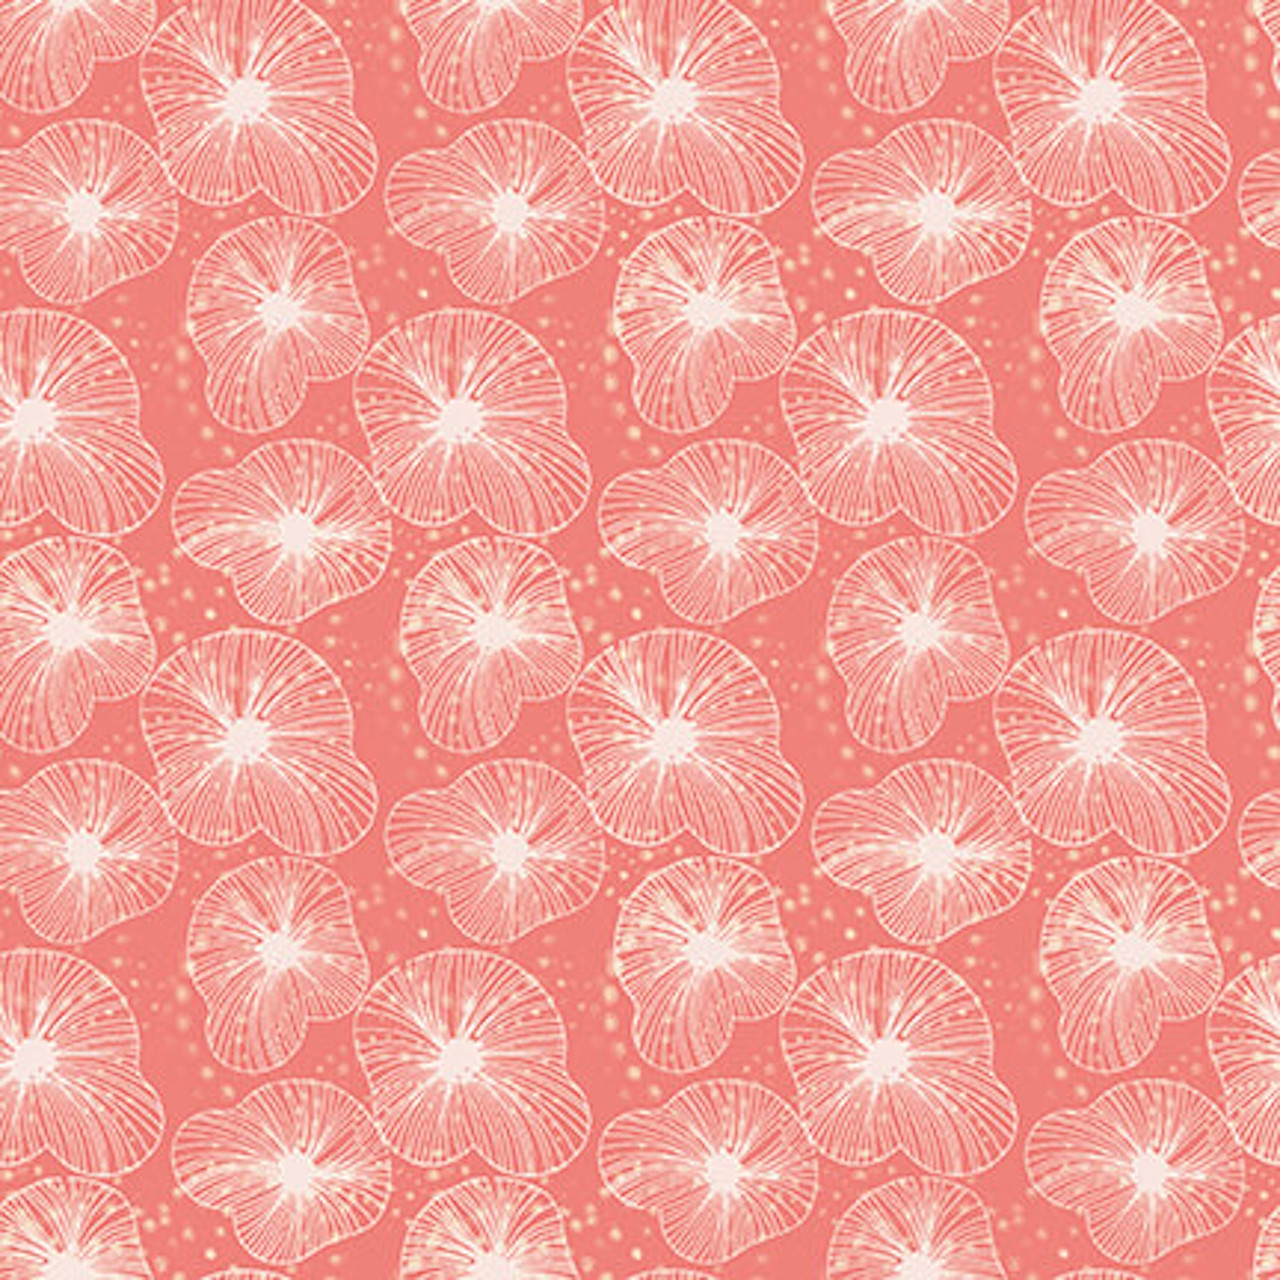 Studio E Koi Garden Tossed Lily Pads Blush Cotton Fabric By The Yard